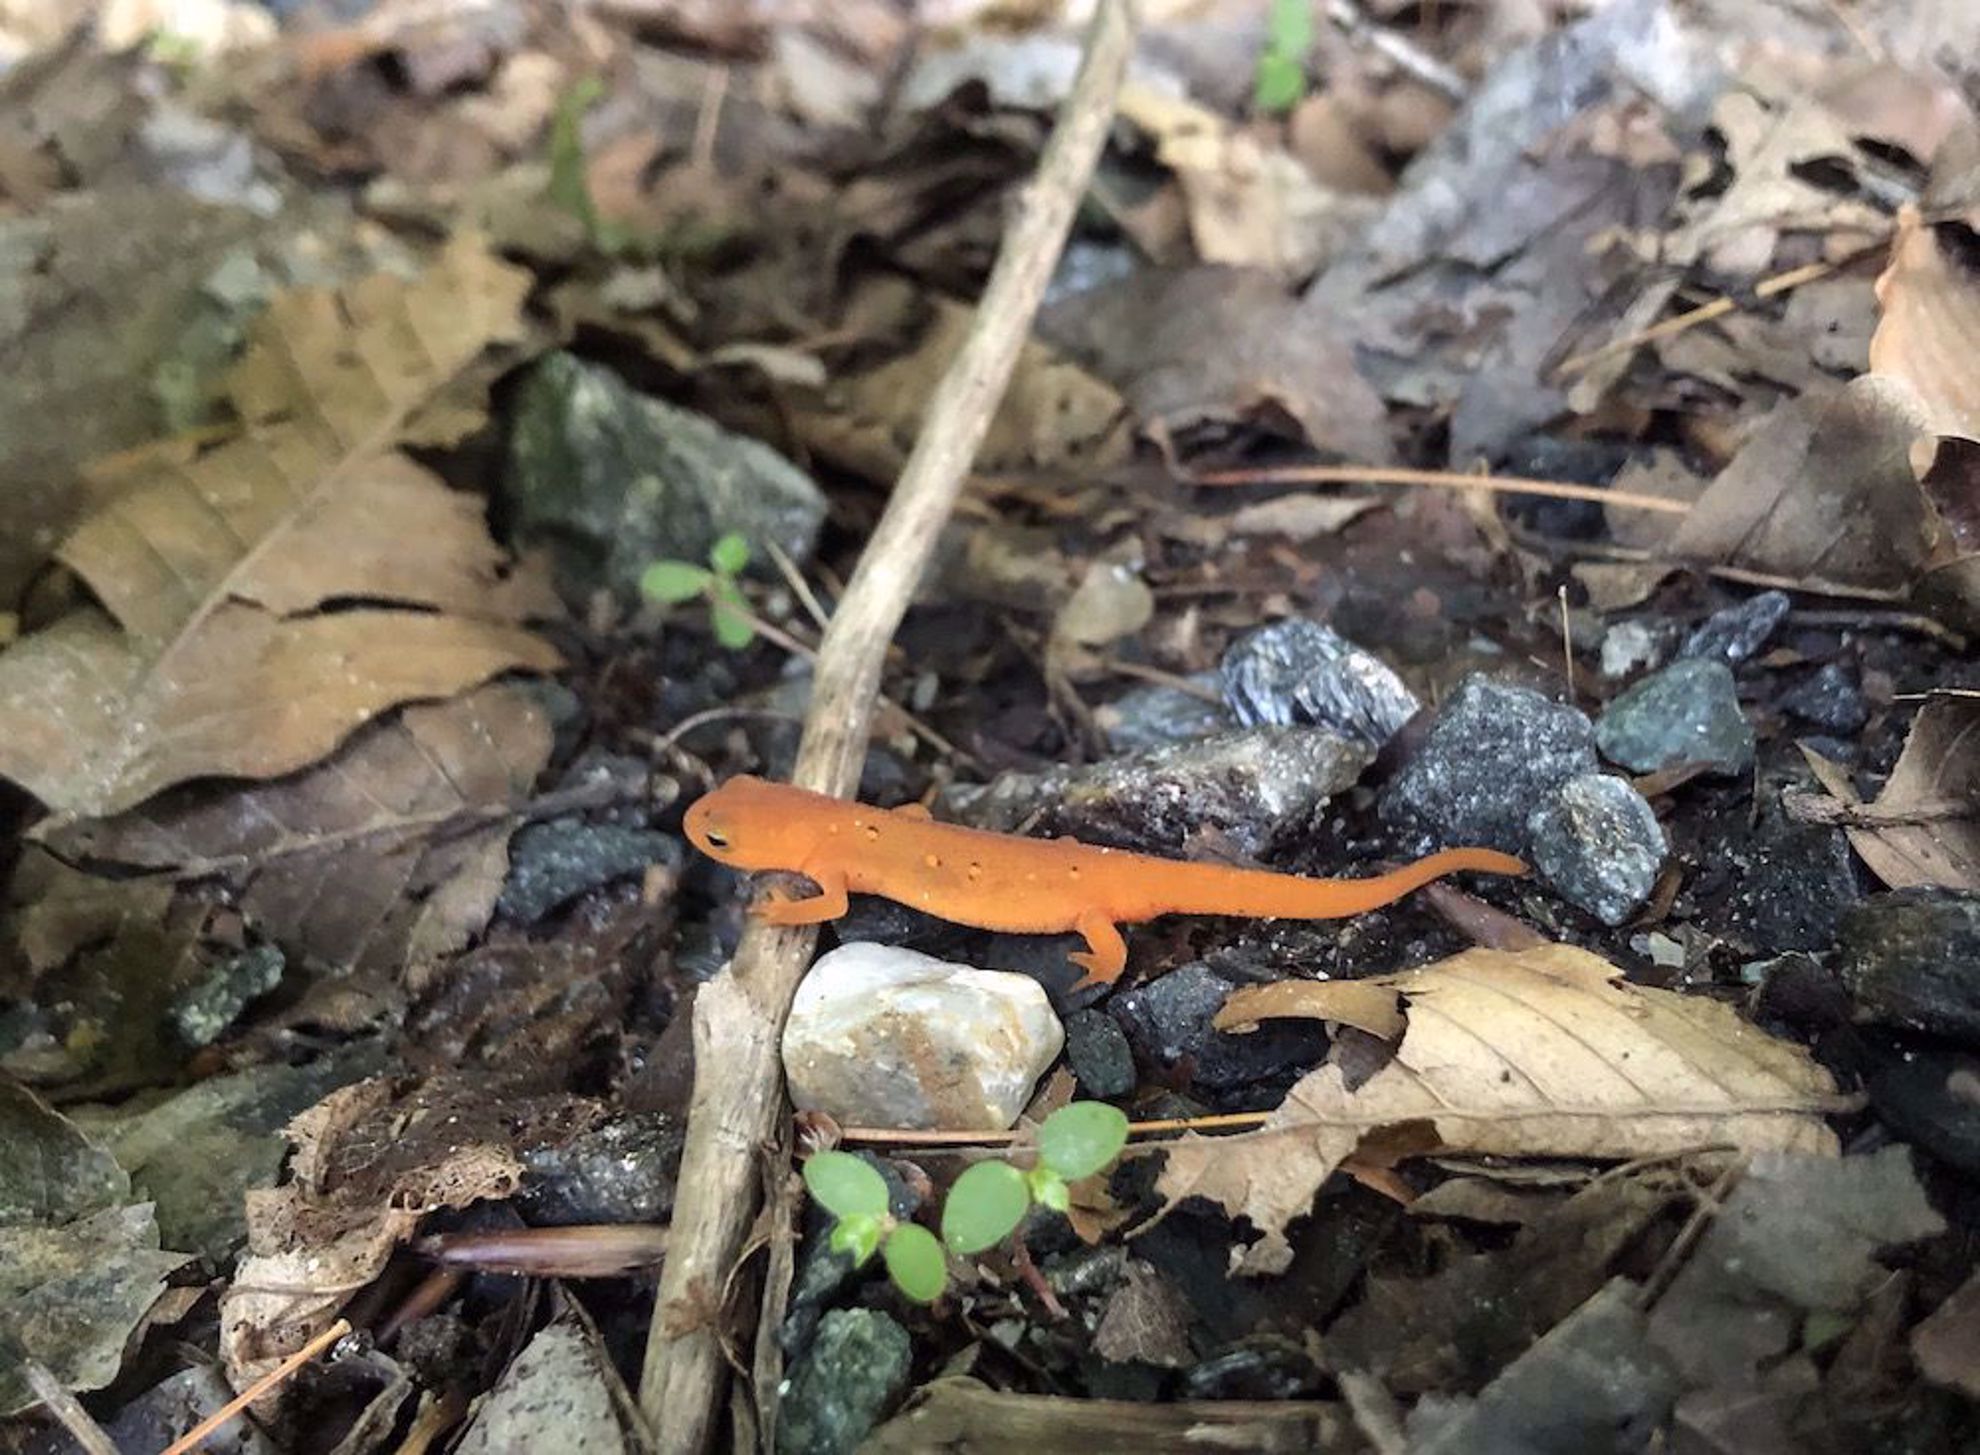 Red eft on hike in stream